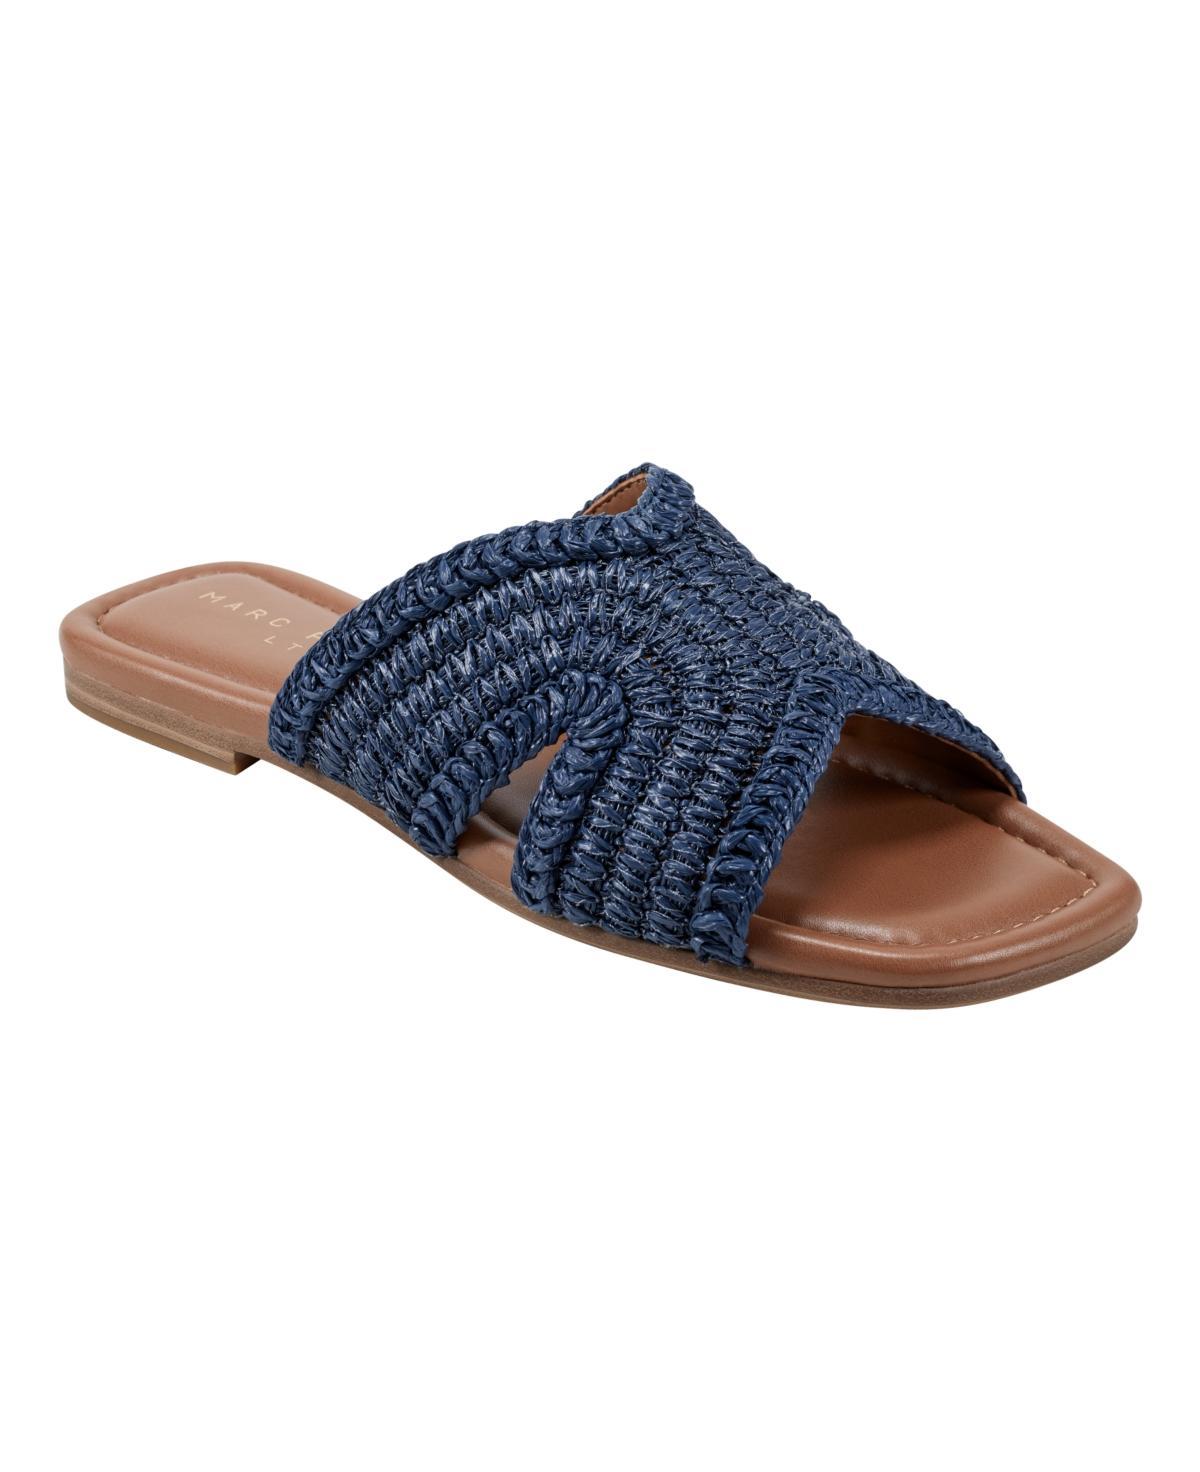 Marc Fisher Ltd. Womens Woven Slide Sandals Product Image